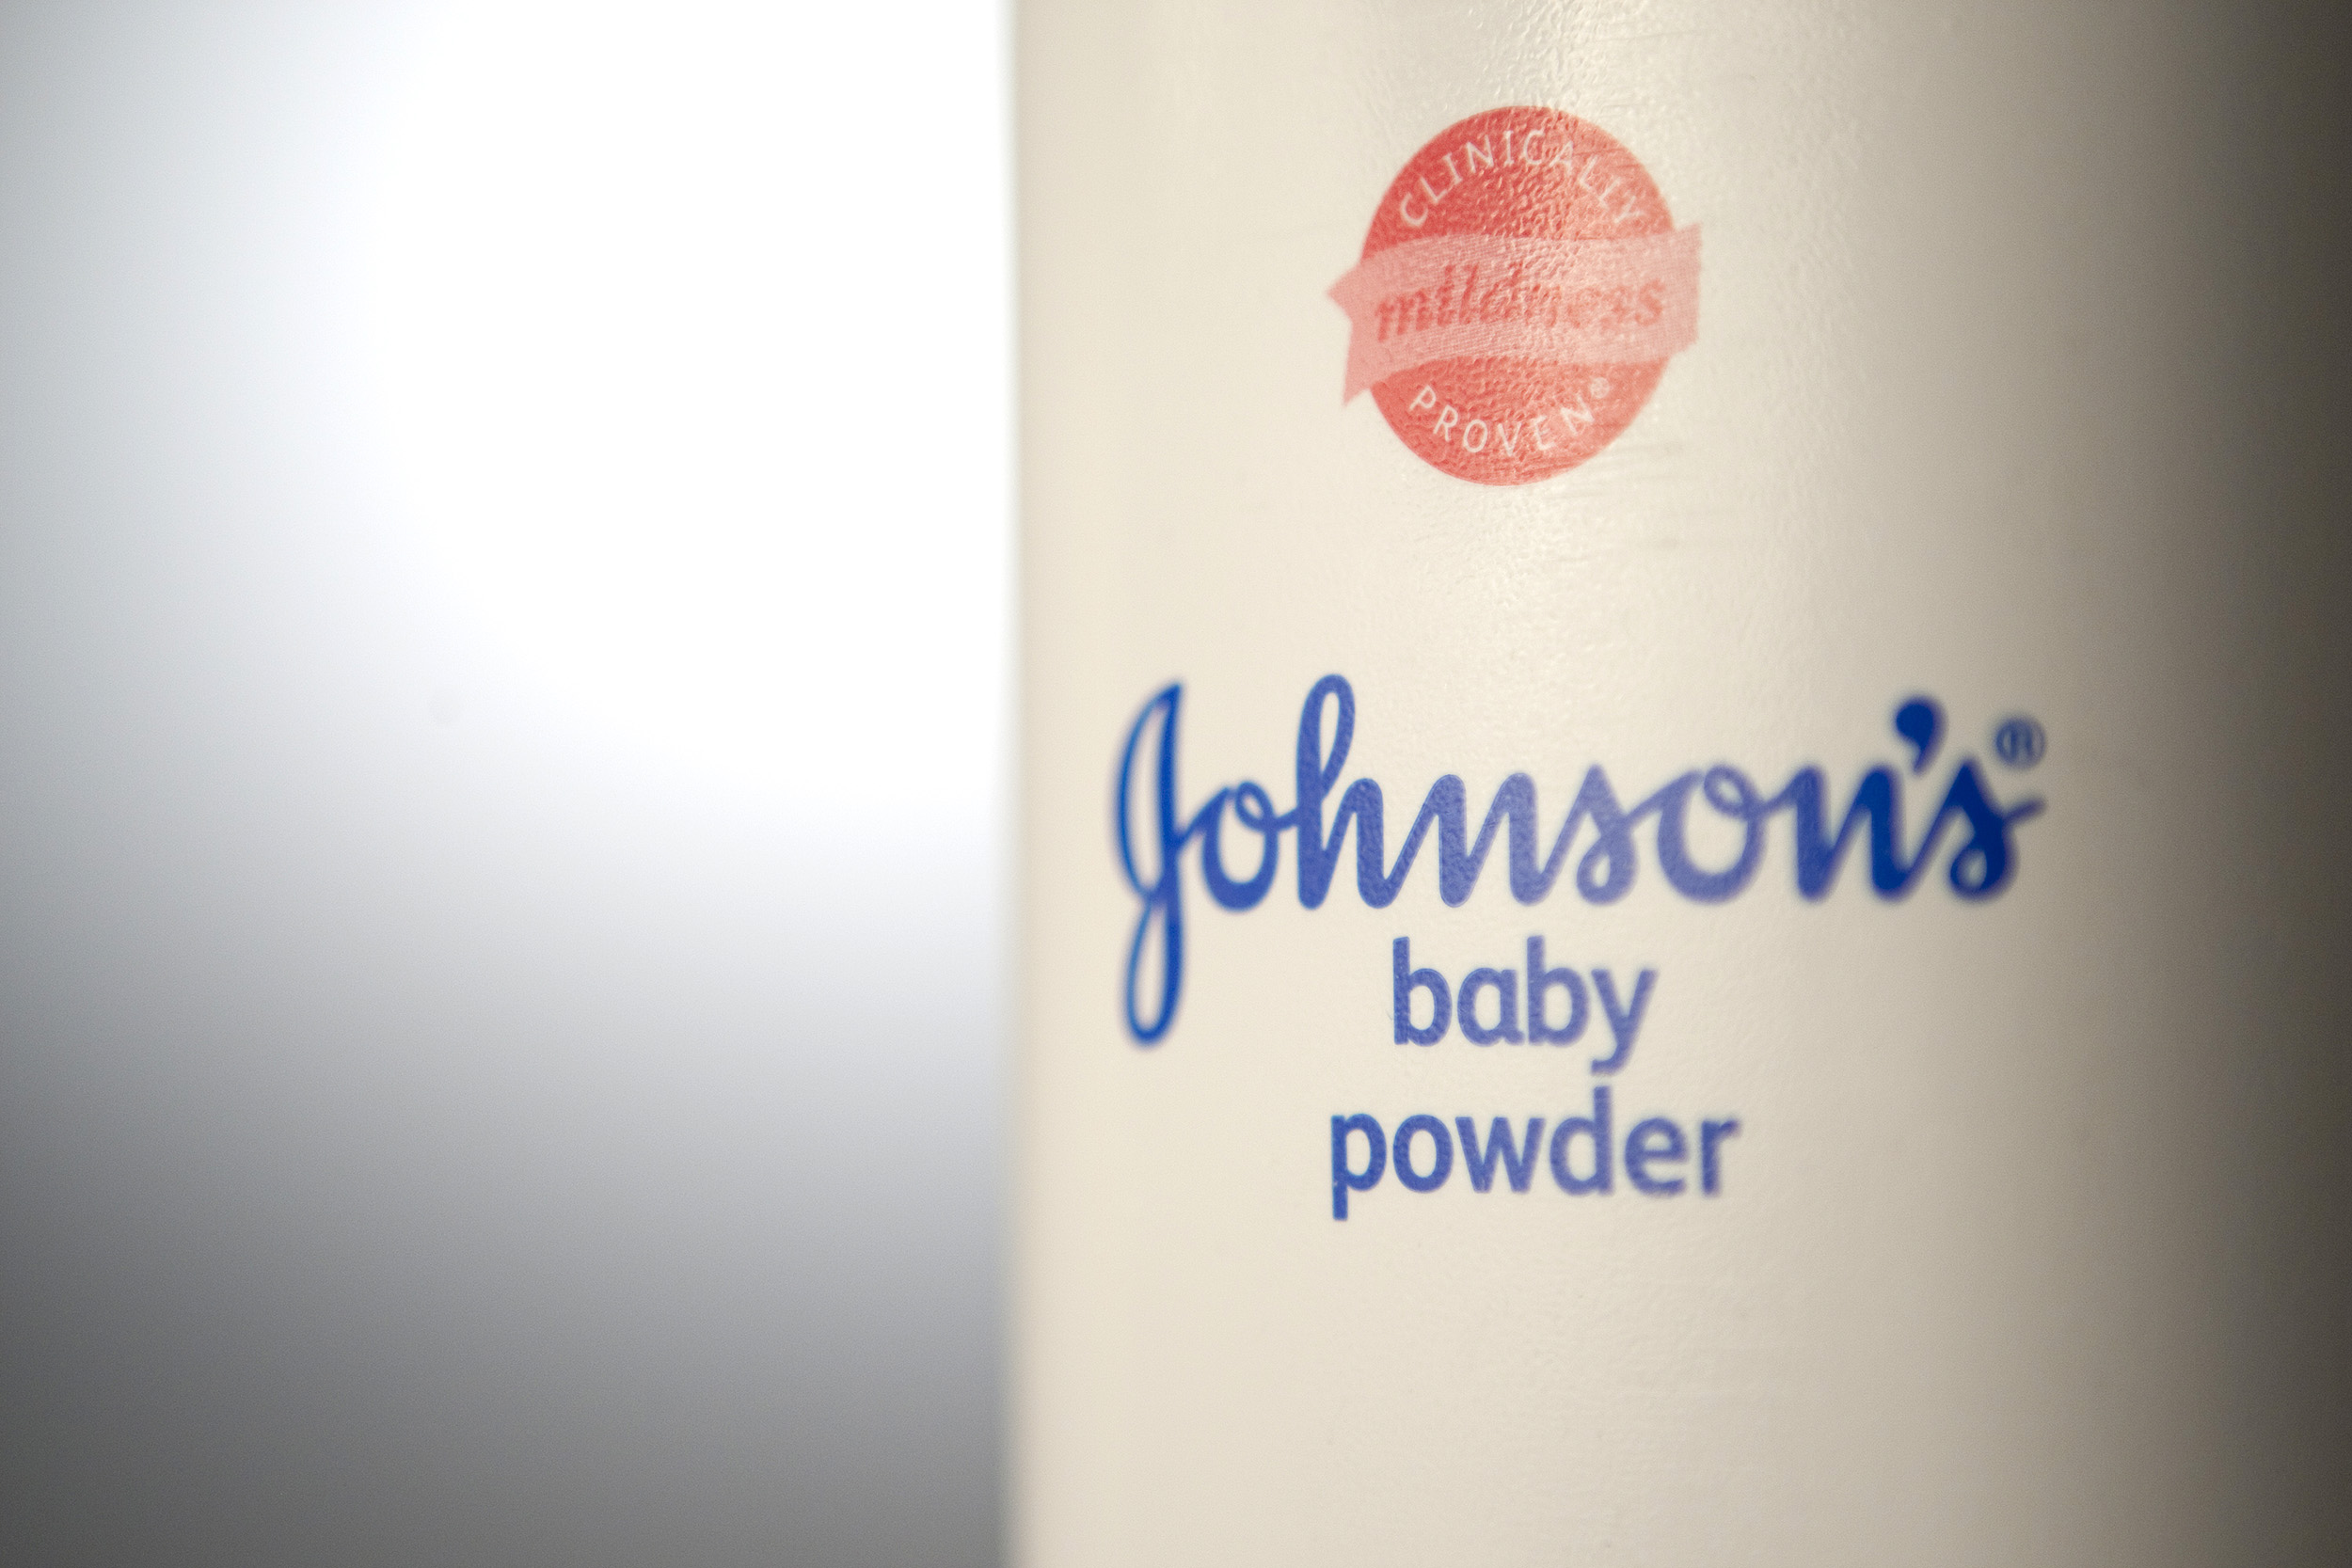 Johnson &amp; Johnson baby powder is arranged for a photograph in New York, on July 15, 2011. (Scott Eells—Bloomberg/Getty Images)